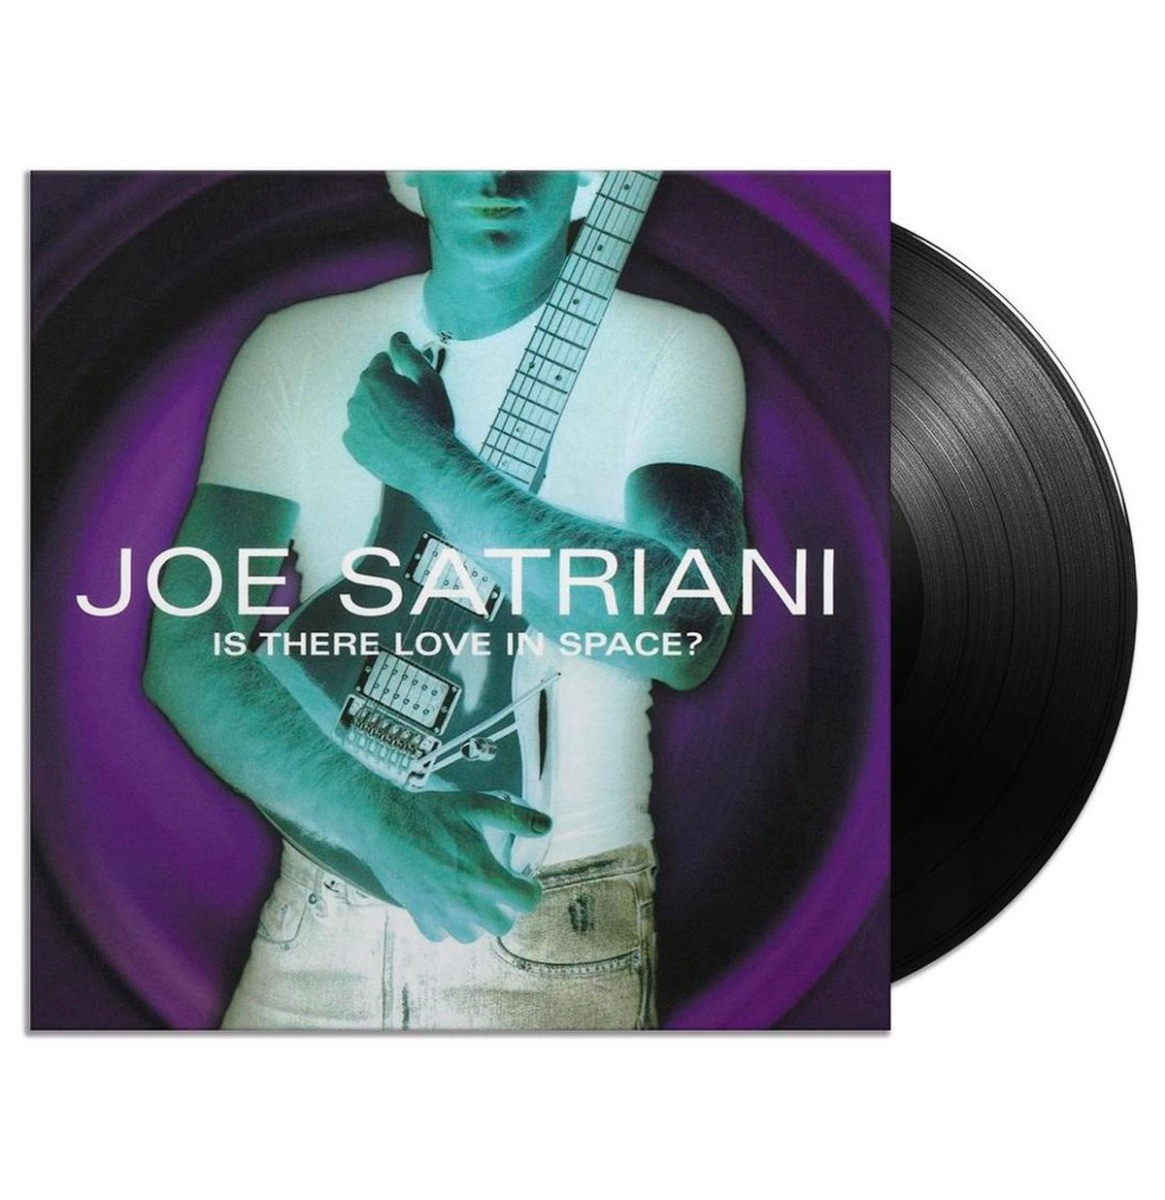 Joe Satriani - Is There Love In Space? 2LP